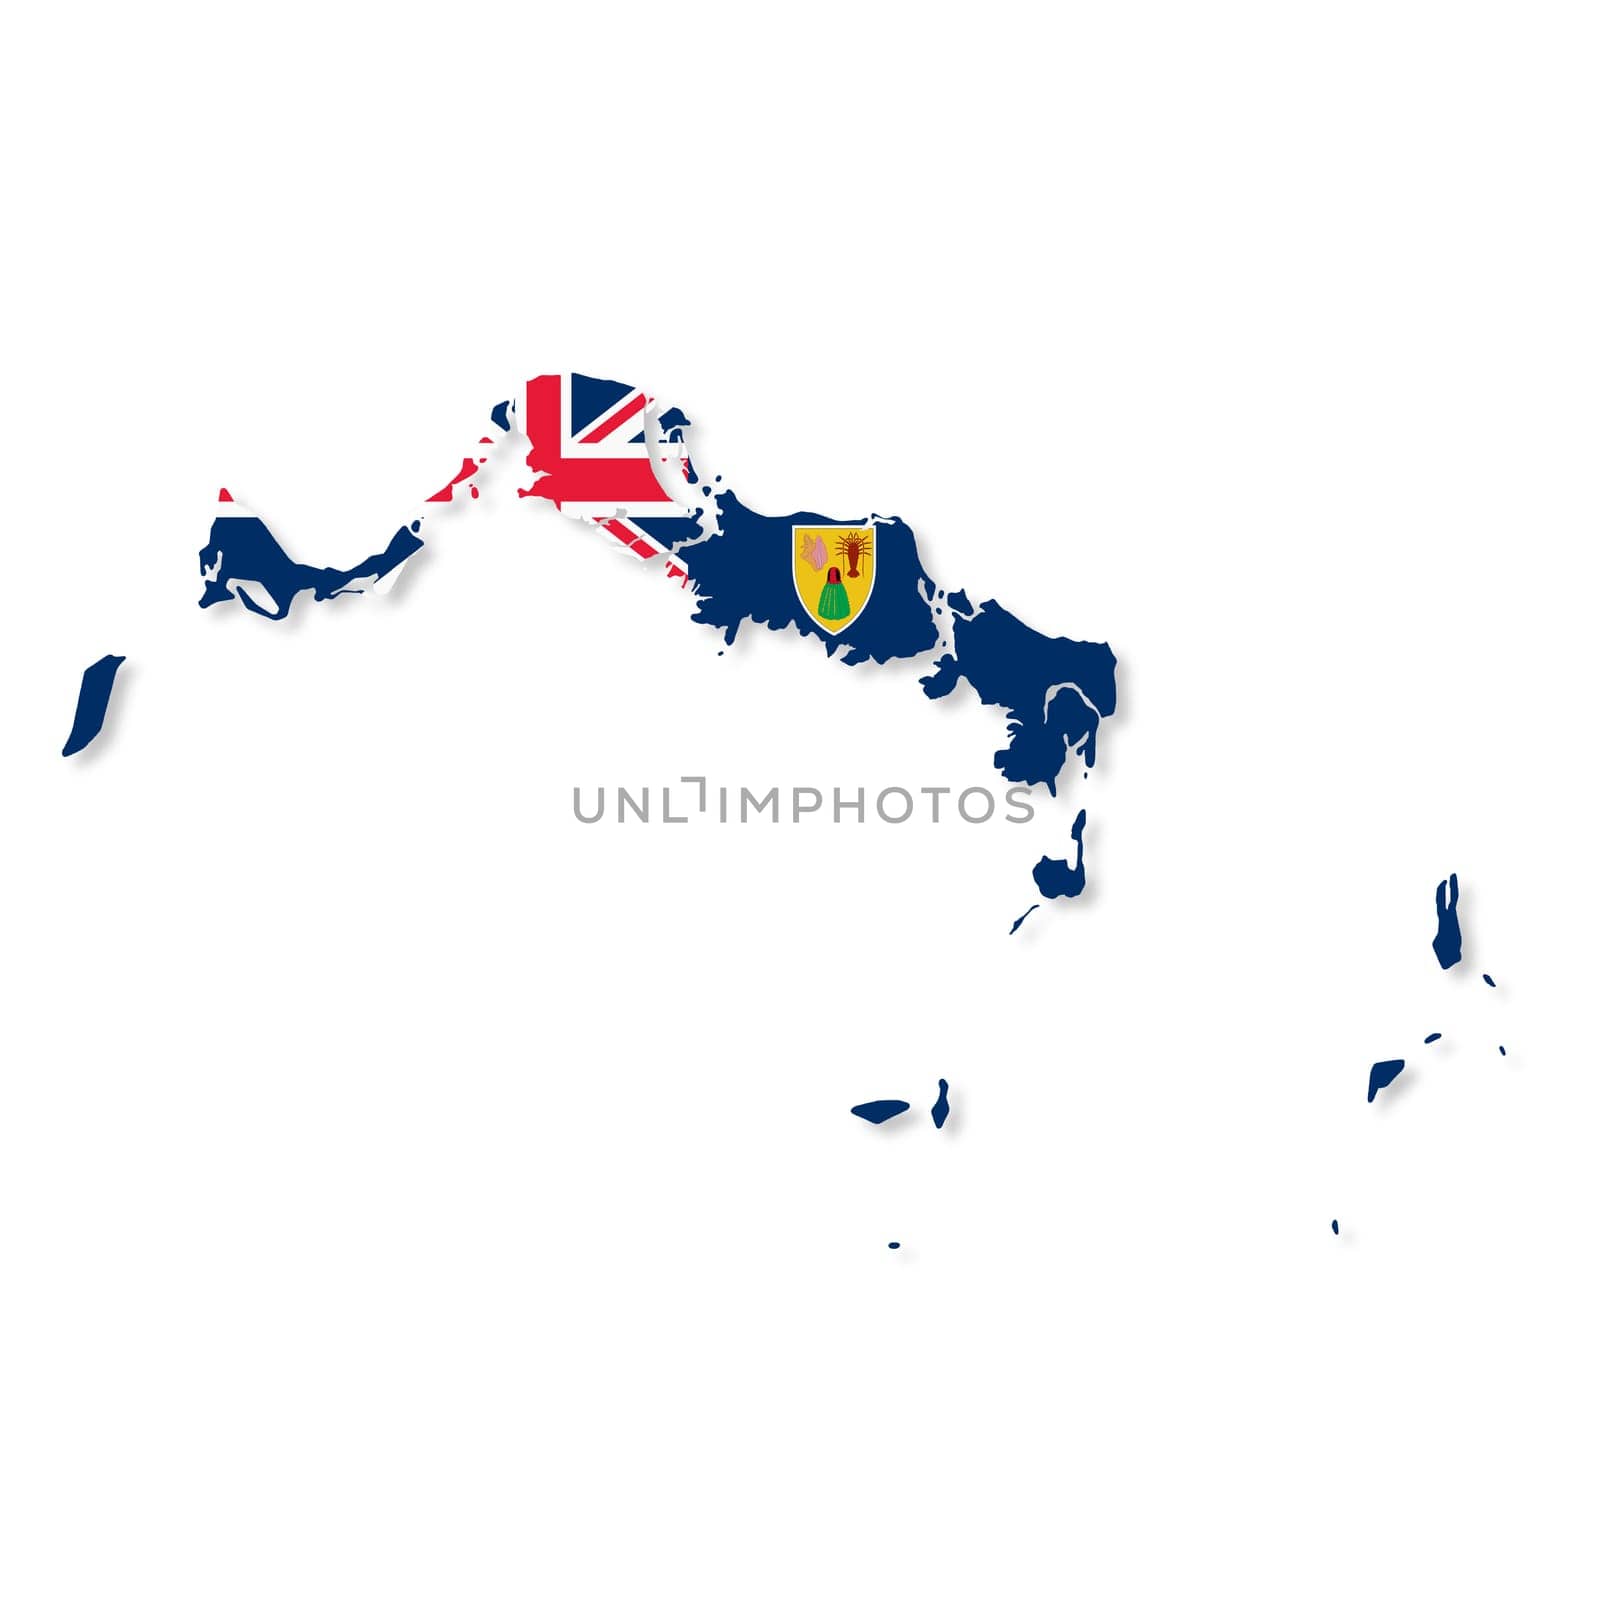 A Turks and Caicos Islands flag map on white background with clipping path 3d illustration